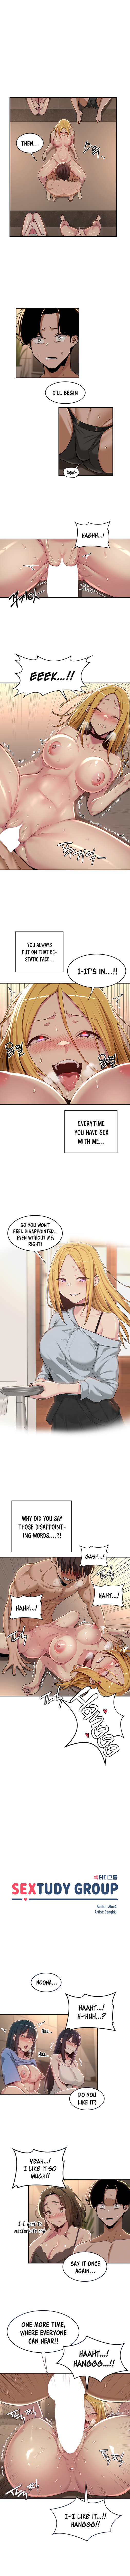 Panel Image 1 for chapter 50 of manhwa Sex Study Group on read.oppai.stream